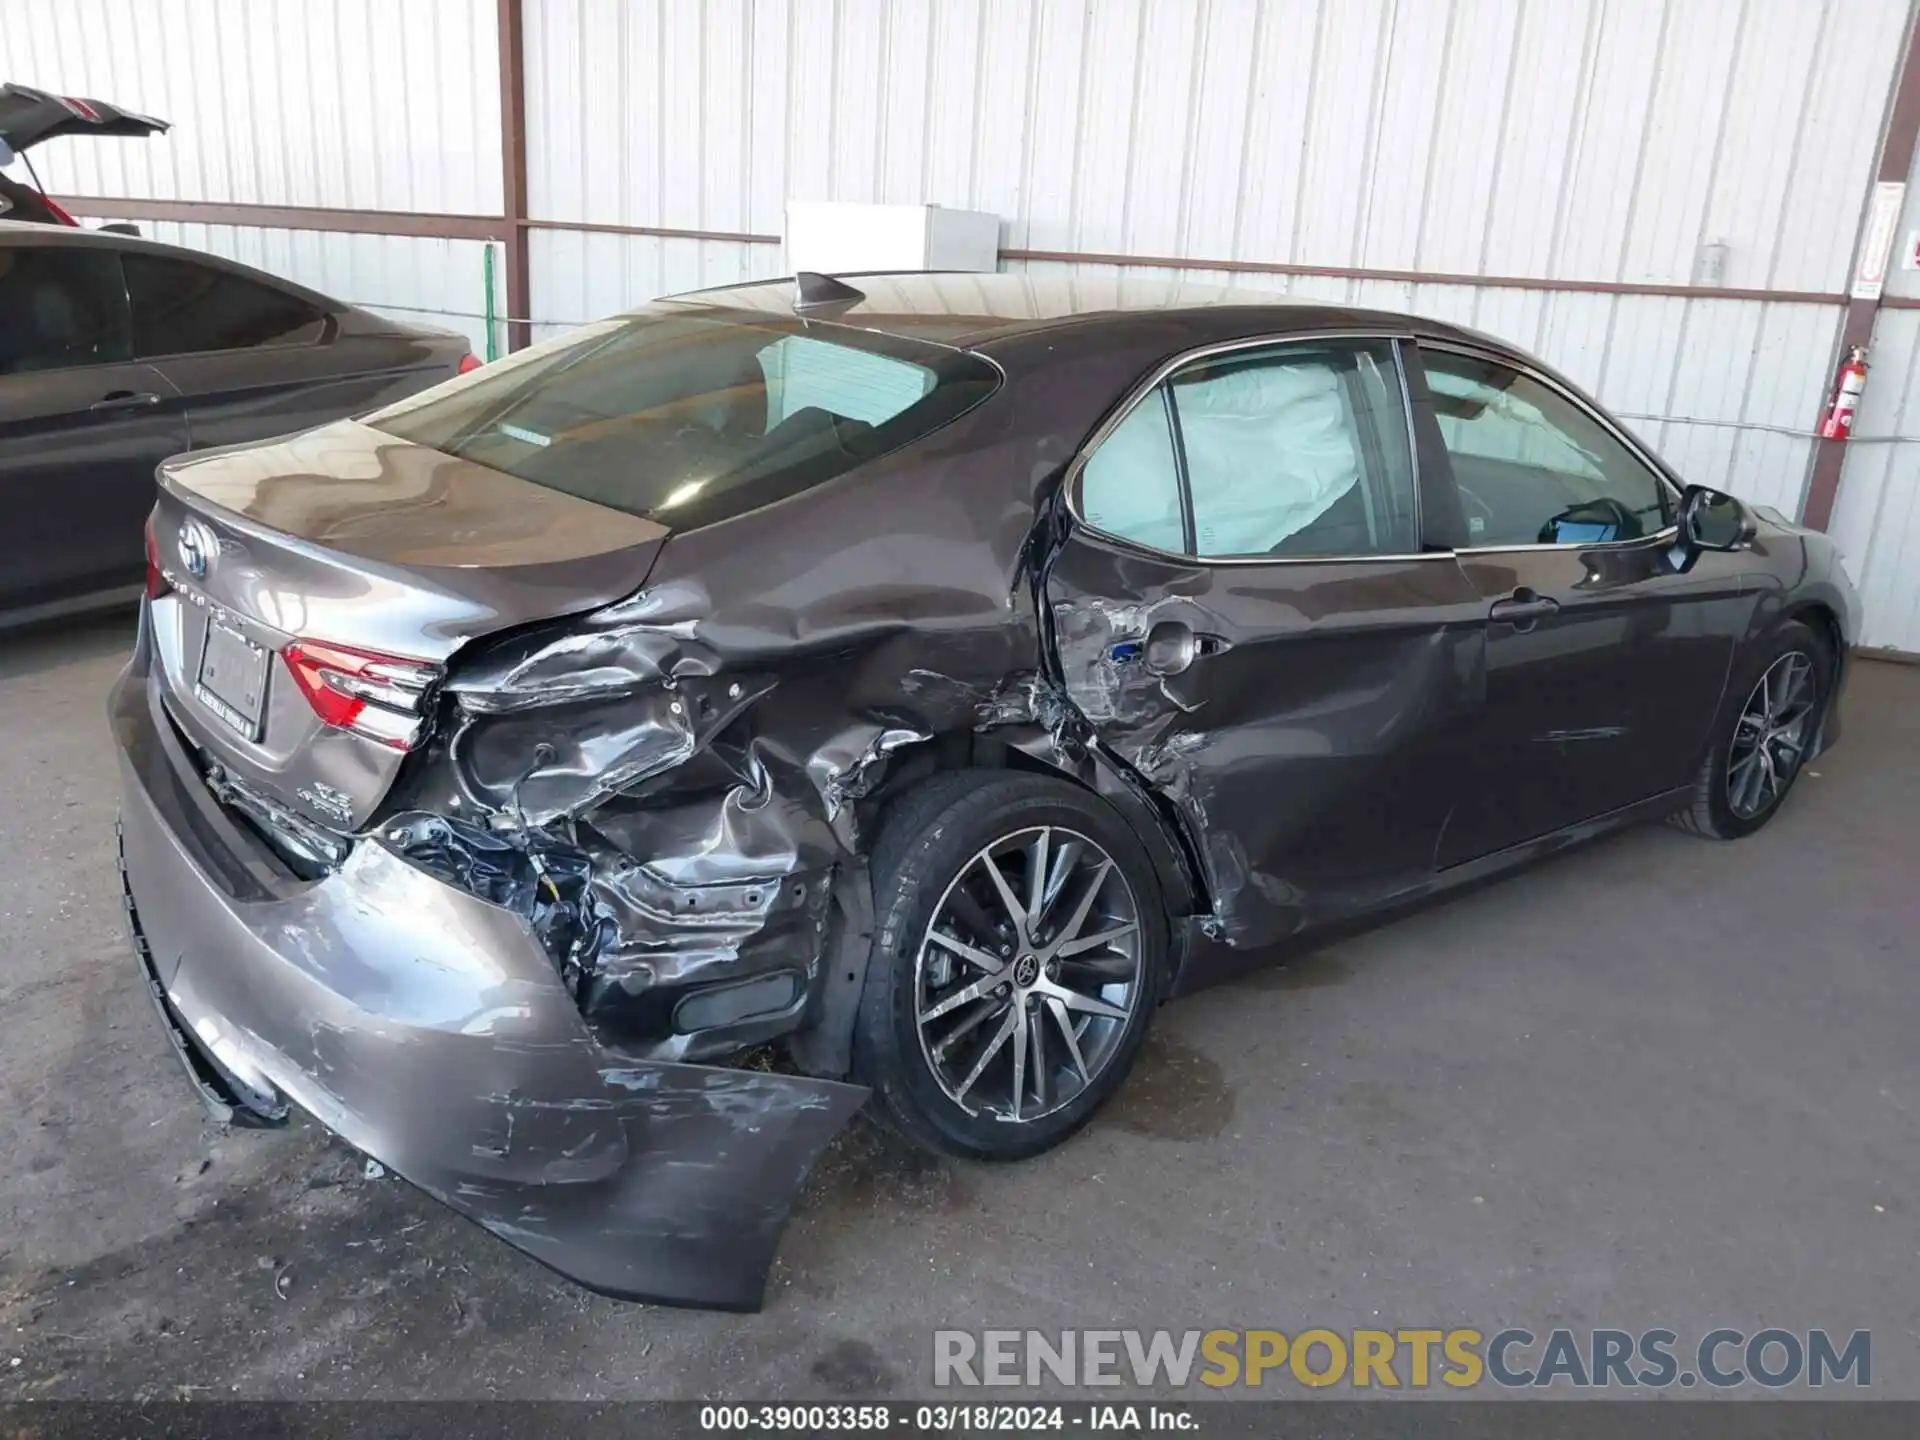 6 Photograph of a damaged car 4T1F31AKXNU587441 TOYOTA CAMRY 2022